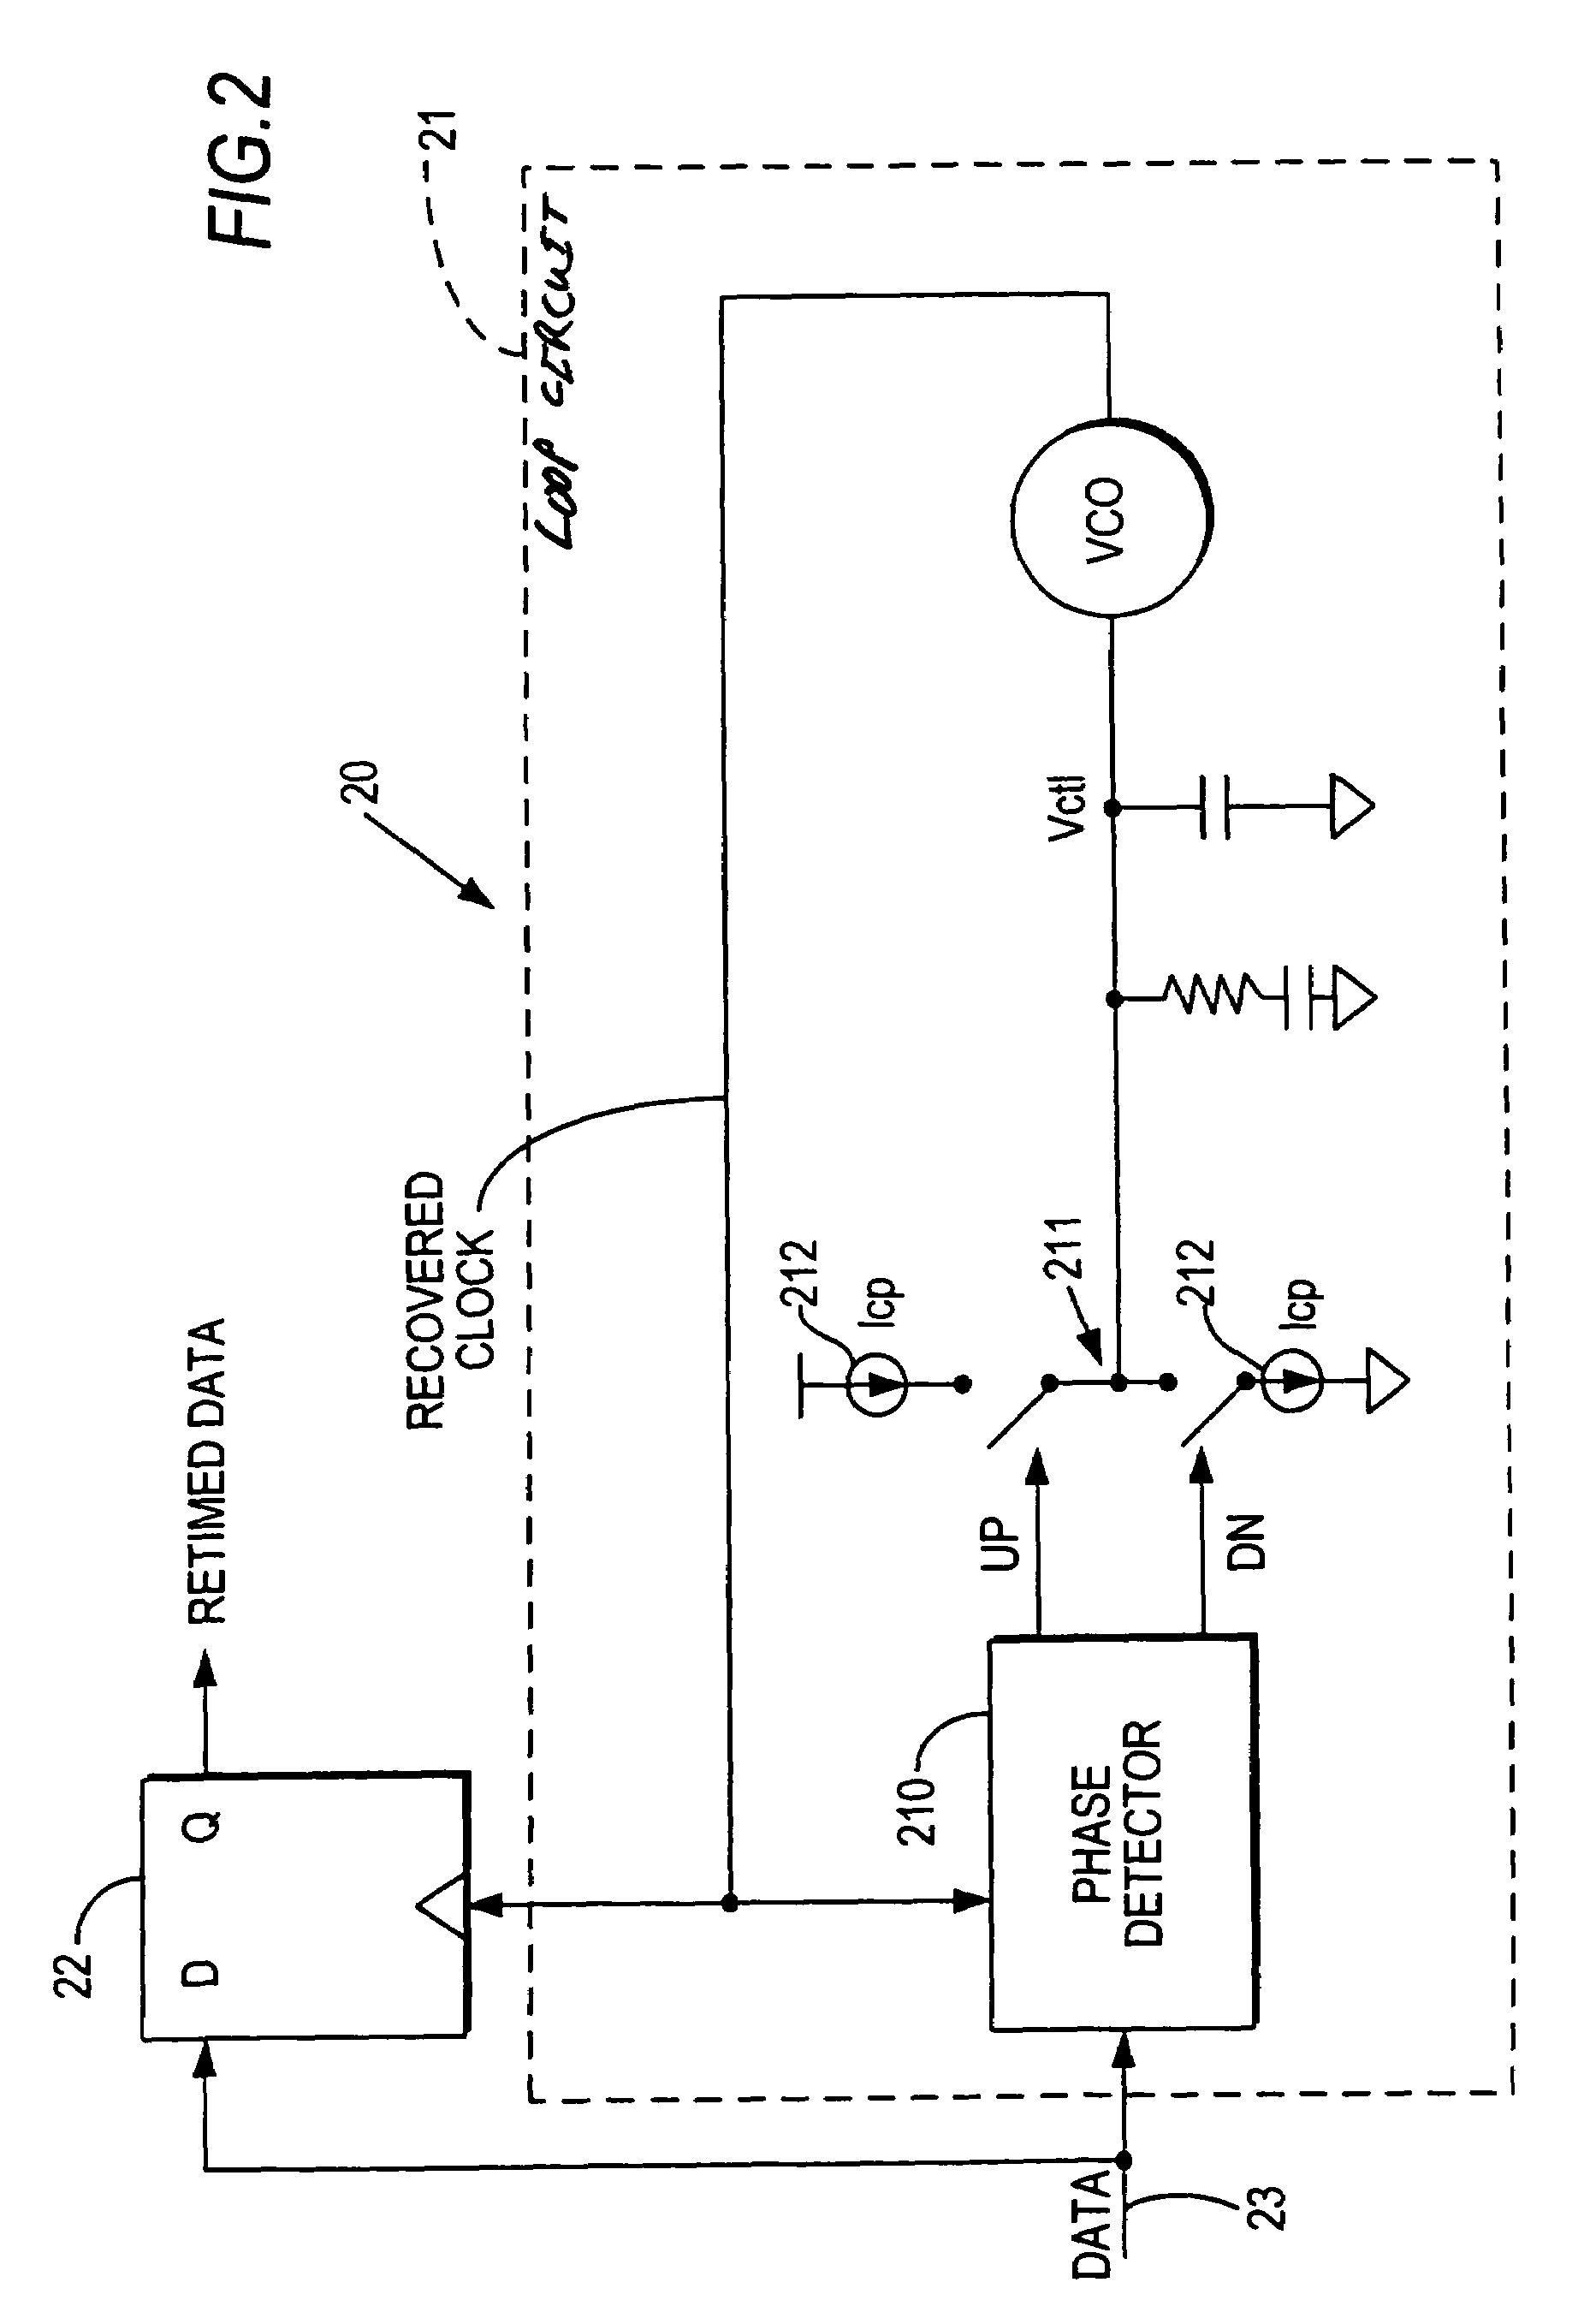 Half-rate linear quardrature phase detector for clock recovery